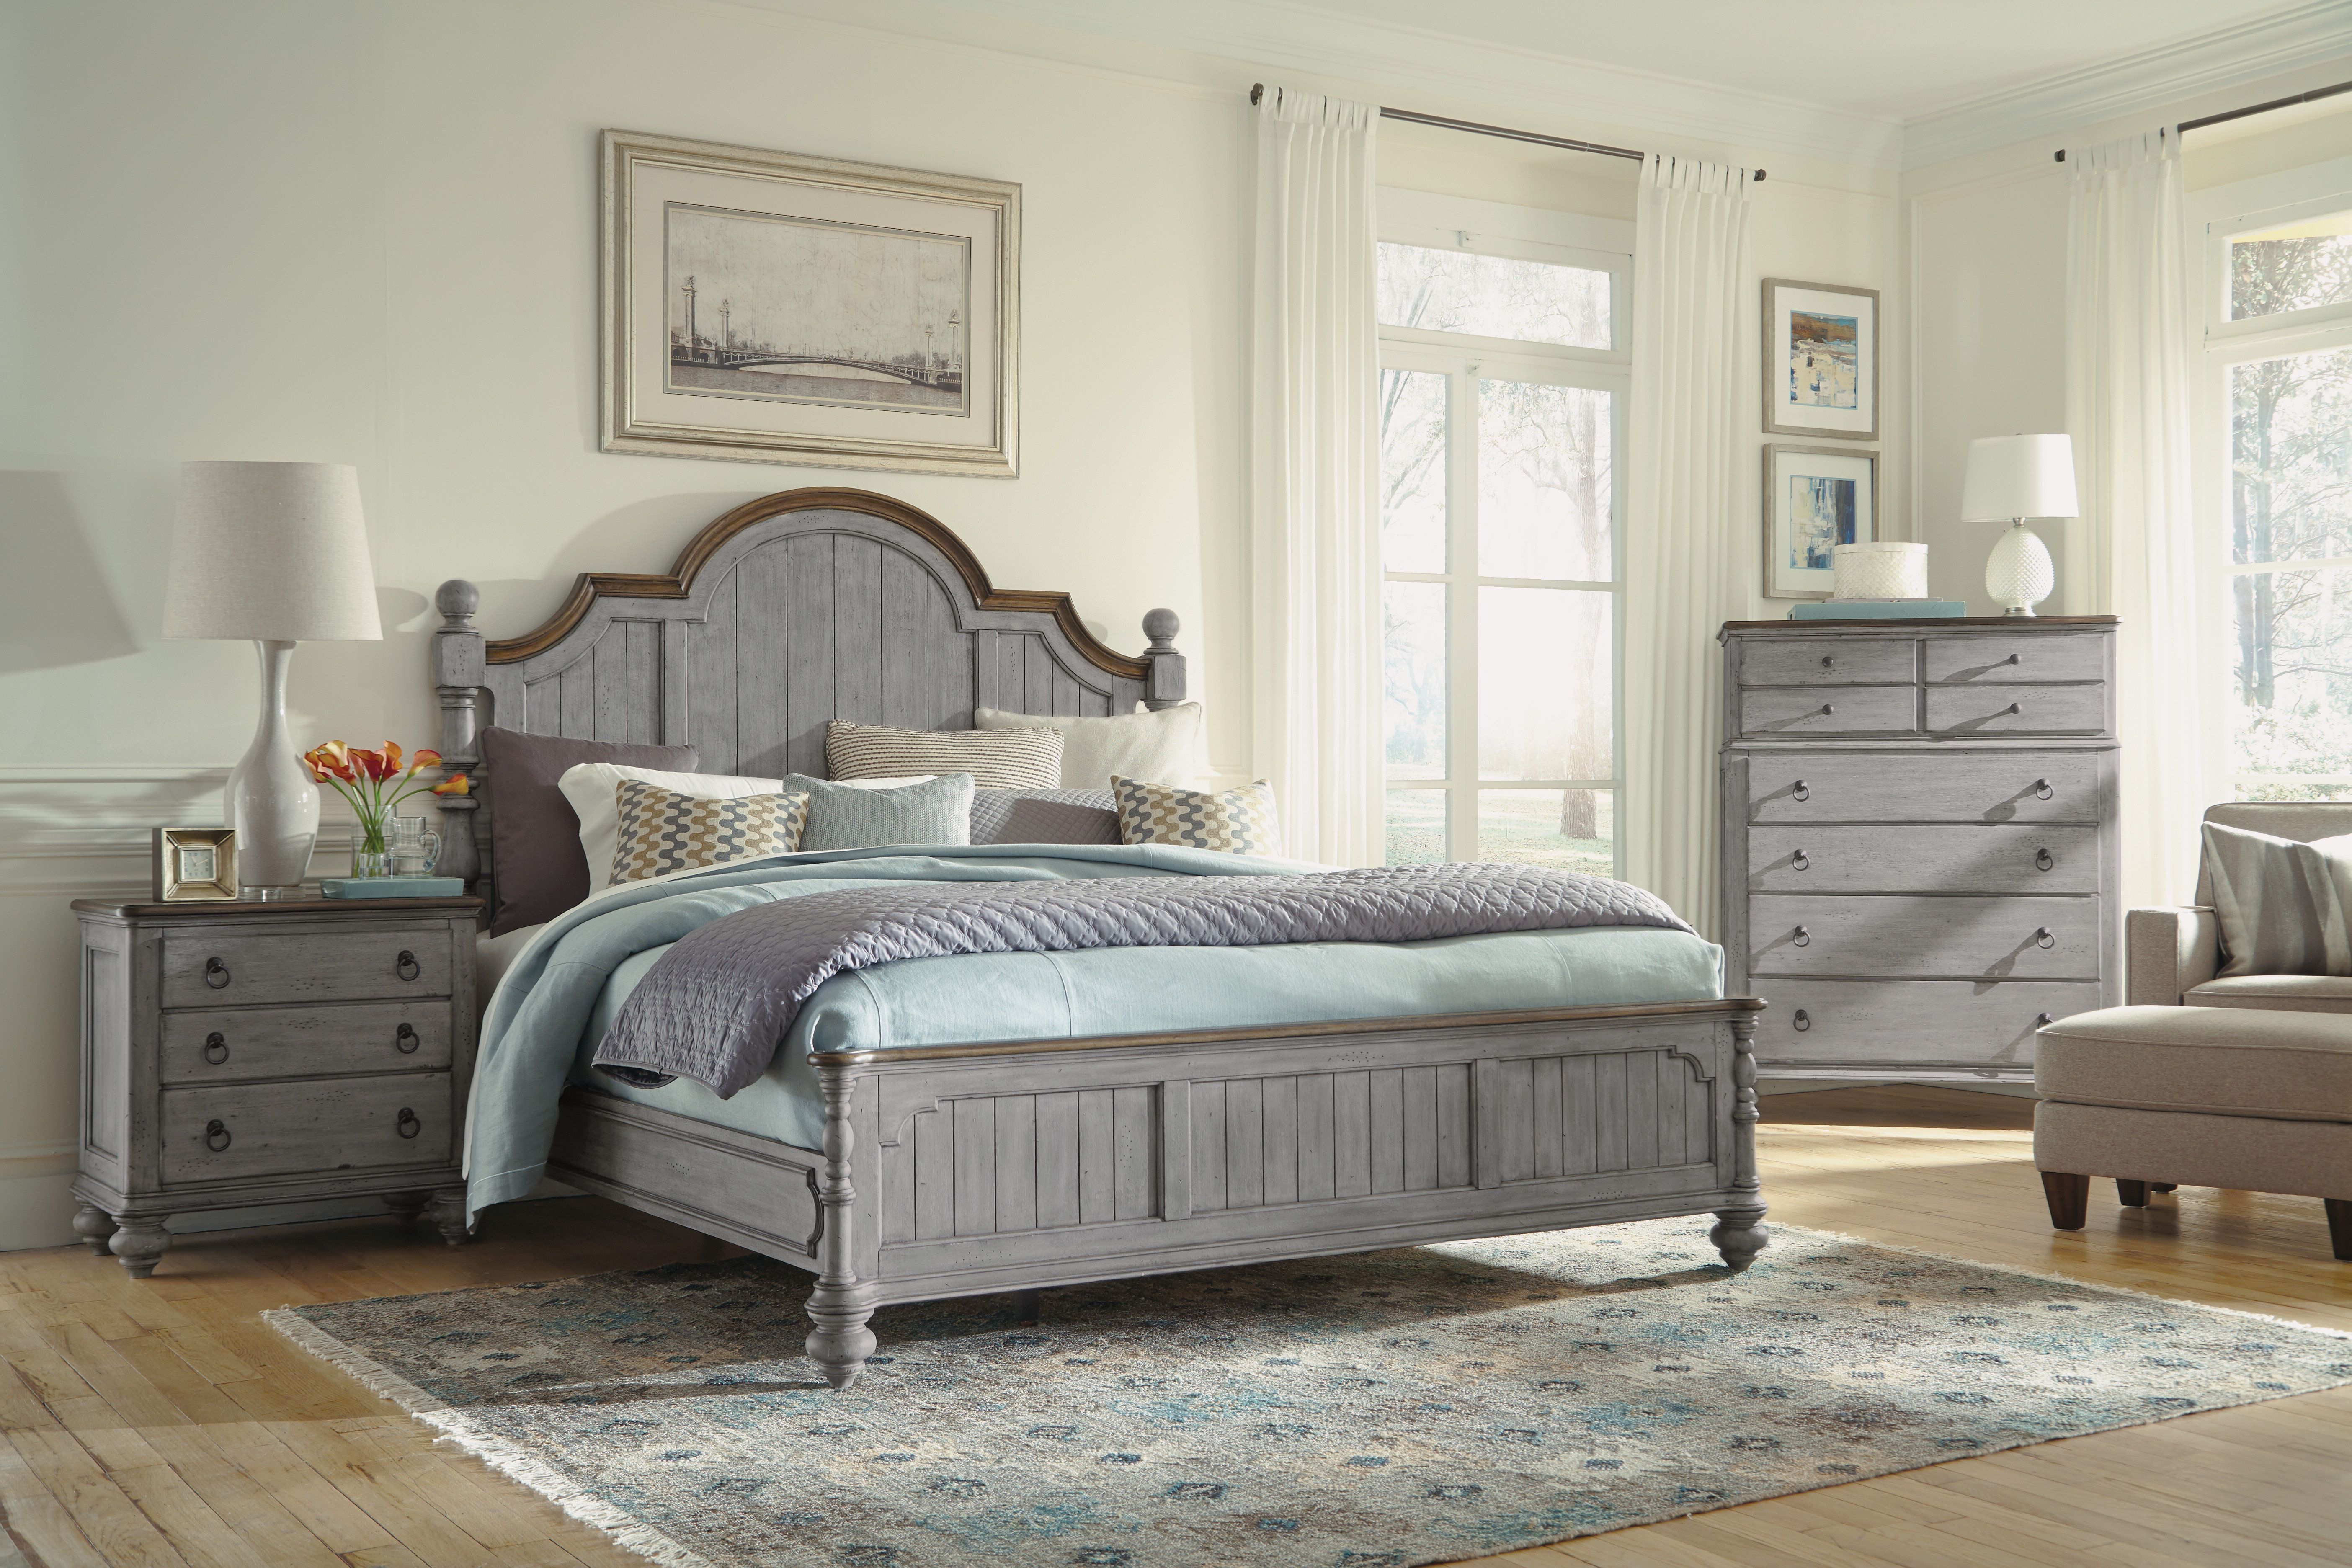 shabby chic bedroom furniture